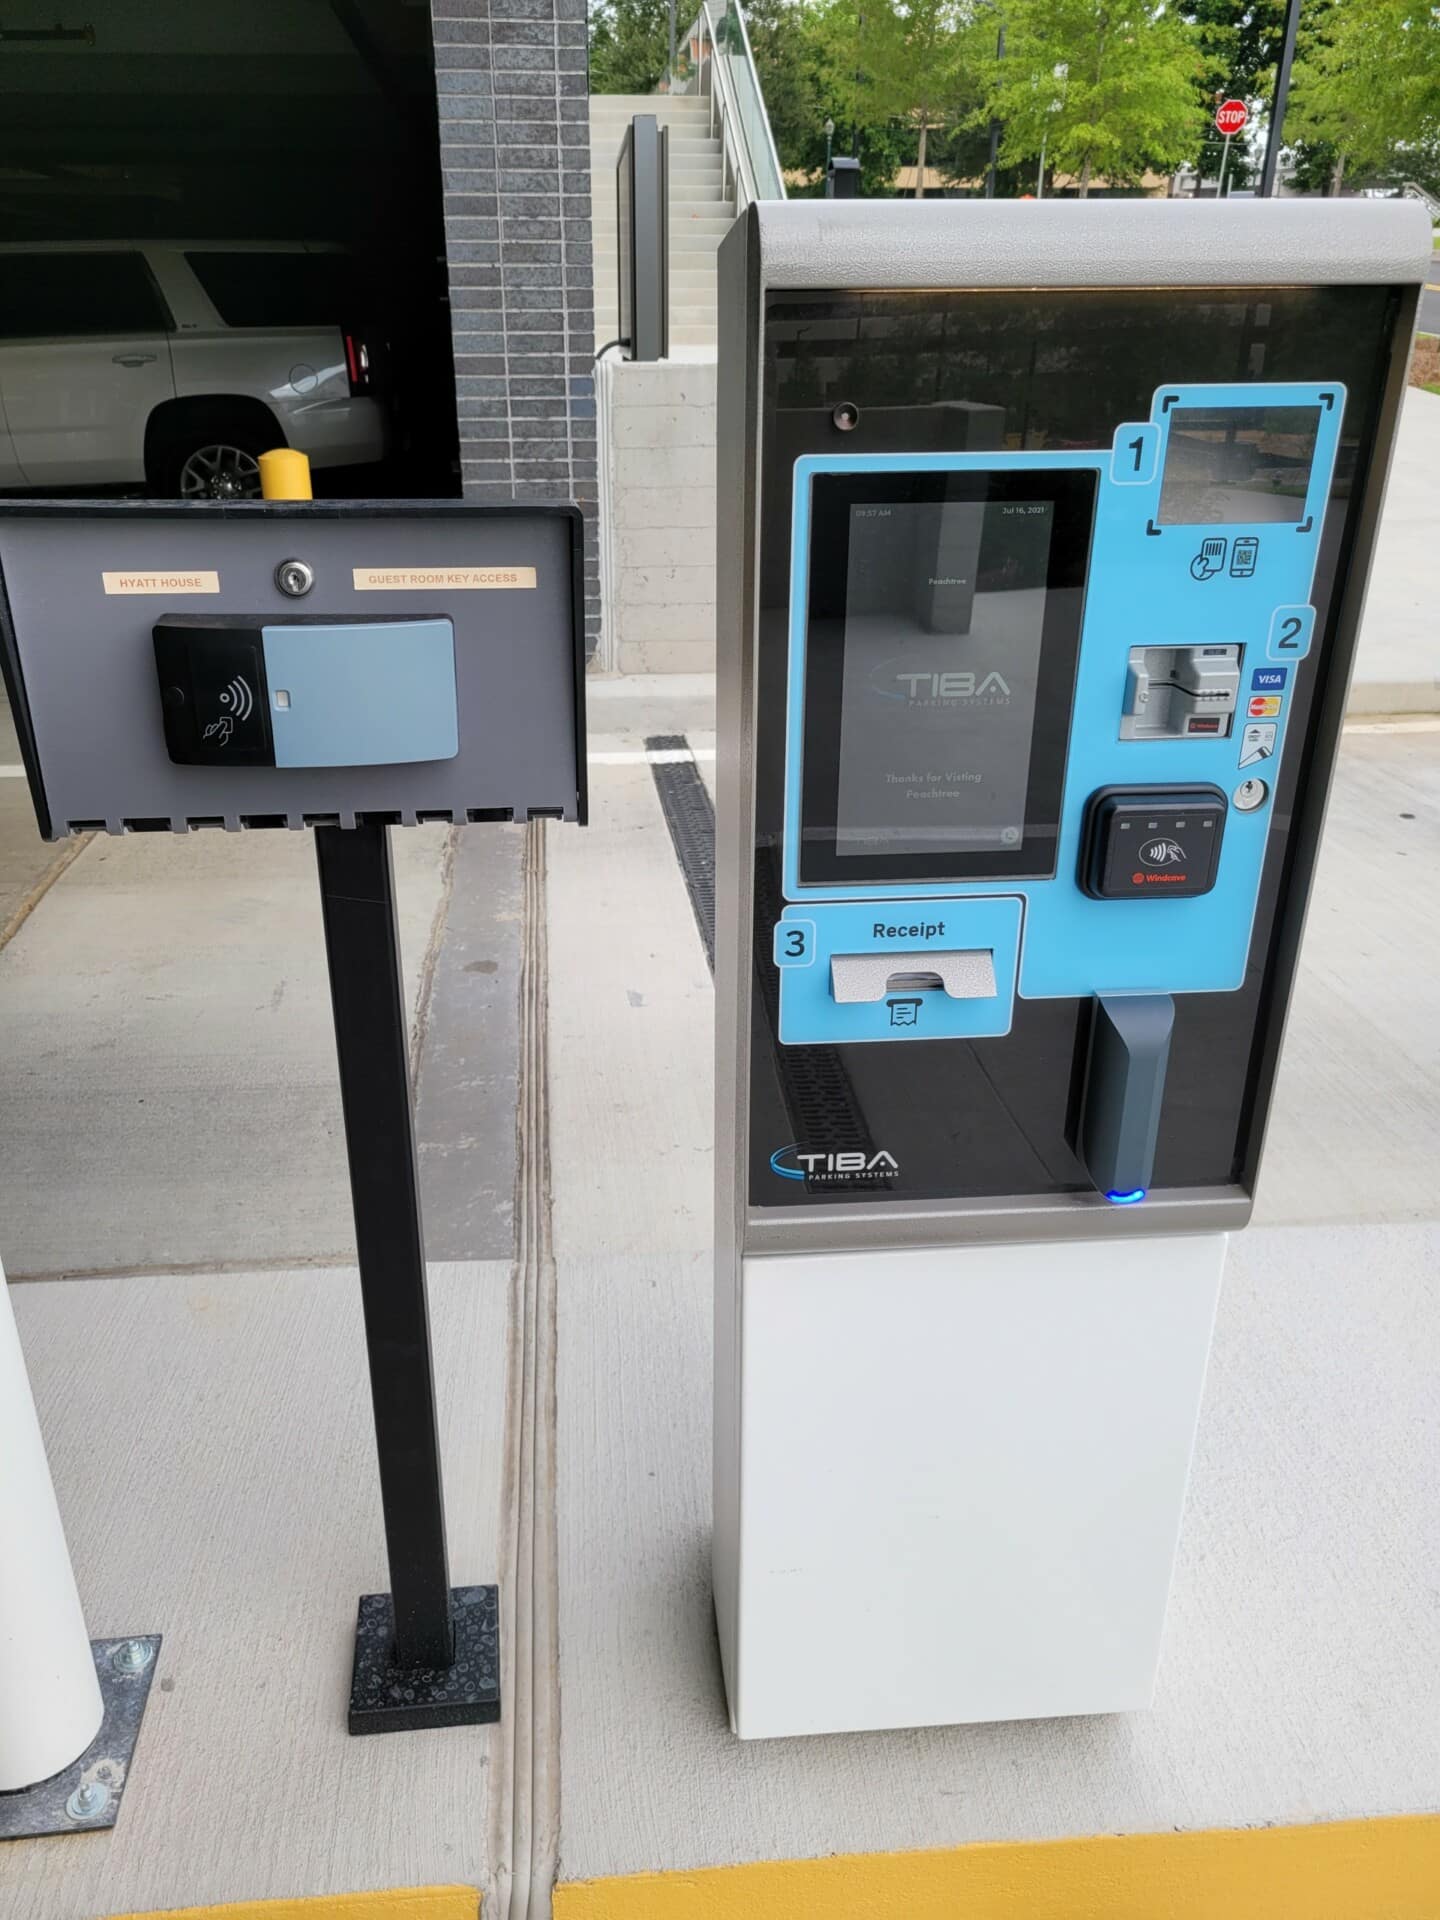 Remote access receiver and touchless payment scanner offer options for secure parking.